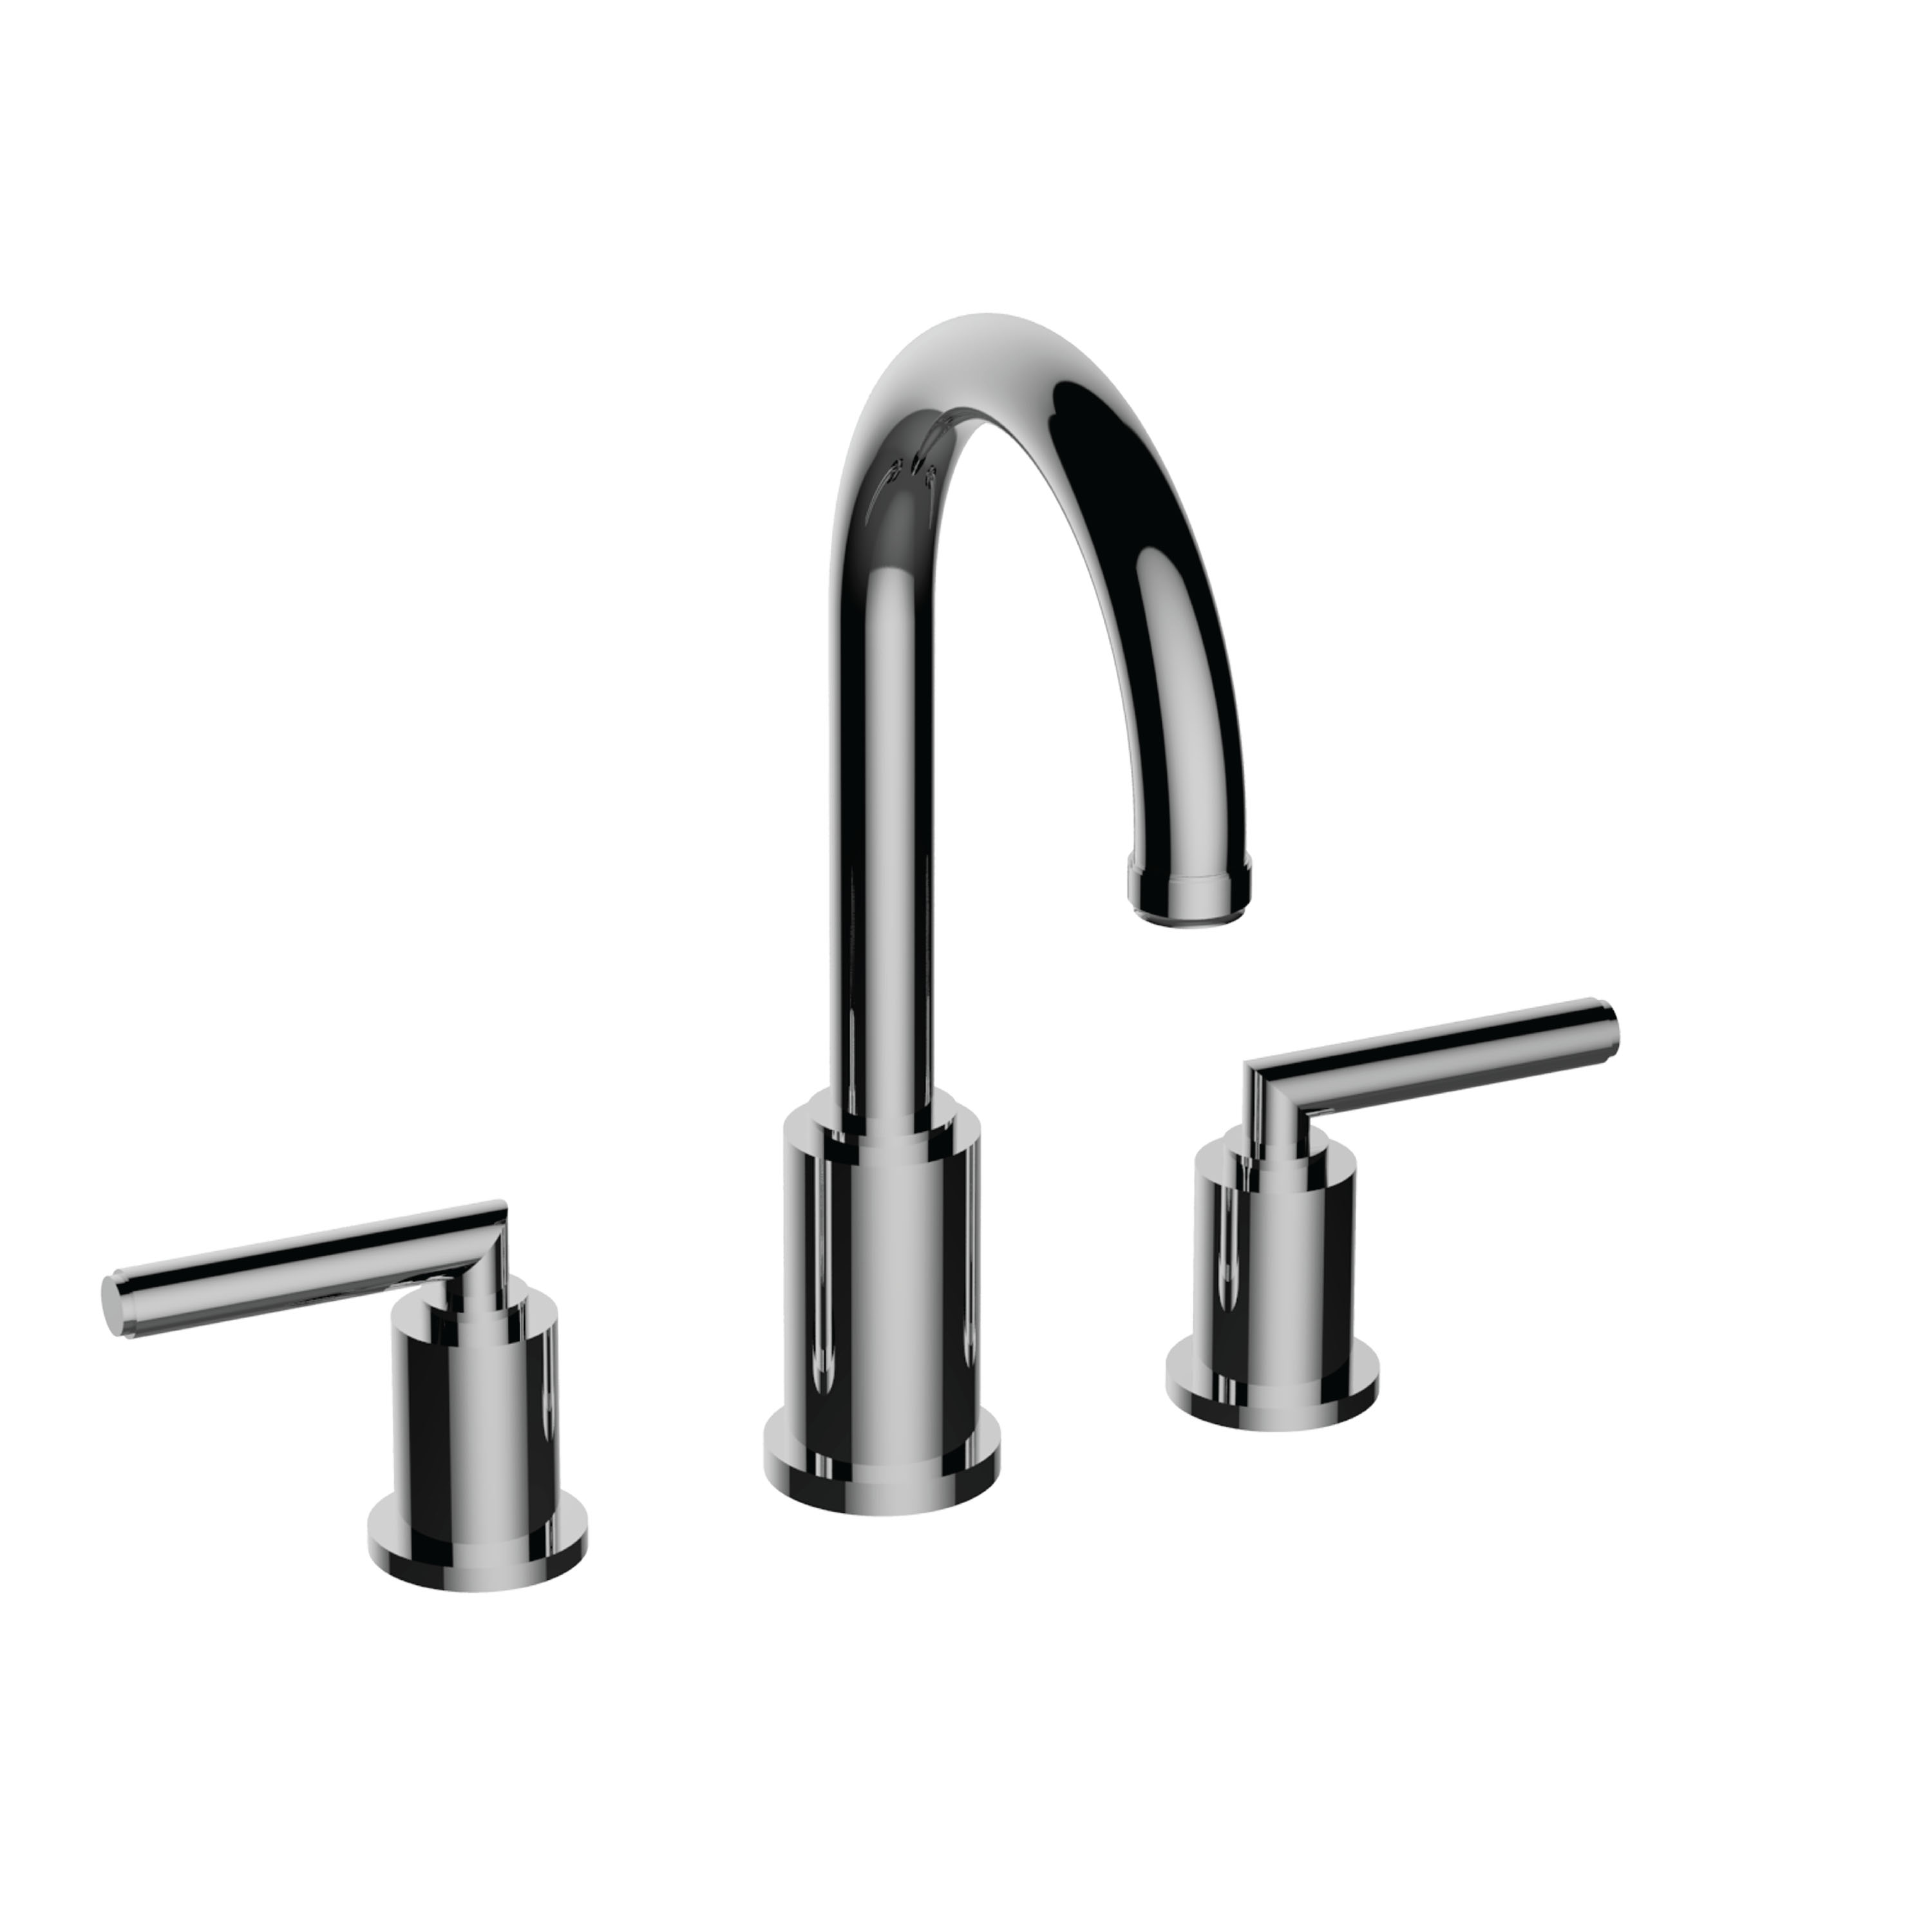 Santec 9450FO10 Roman Tub Filler with Fo Handles - Valves Included - Polished Chrome